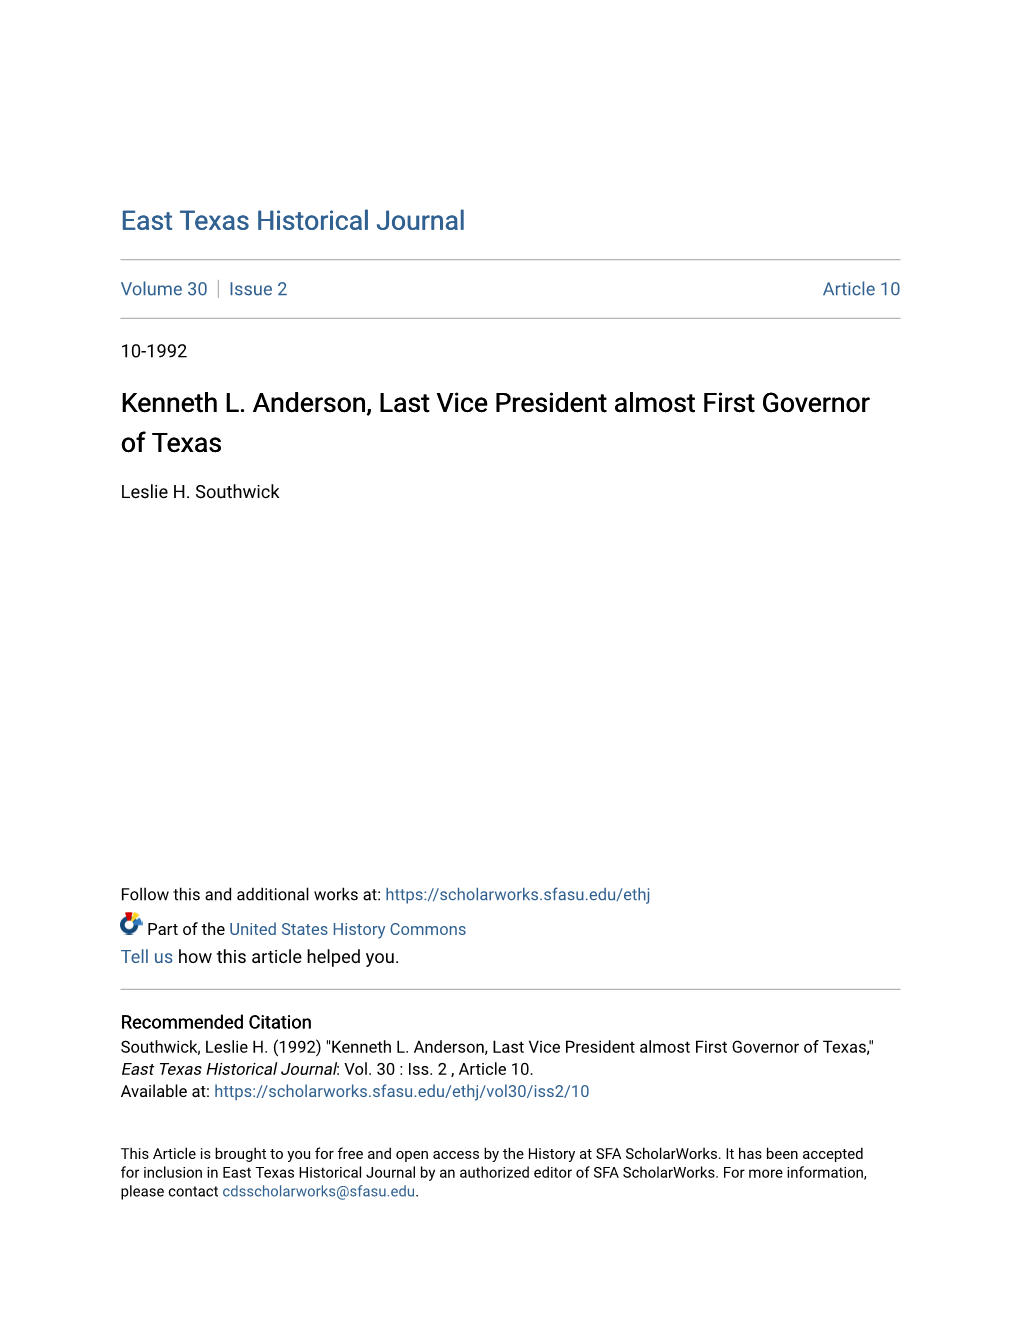 Kenneth L. Anderson, Last Vice President Almost First Governor of Texas